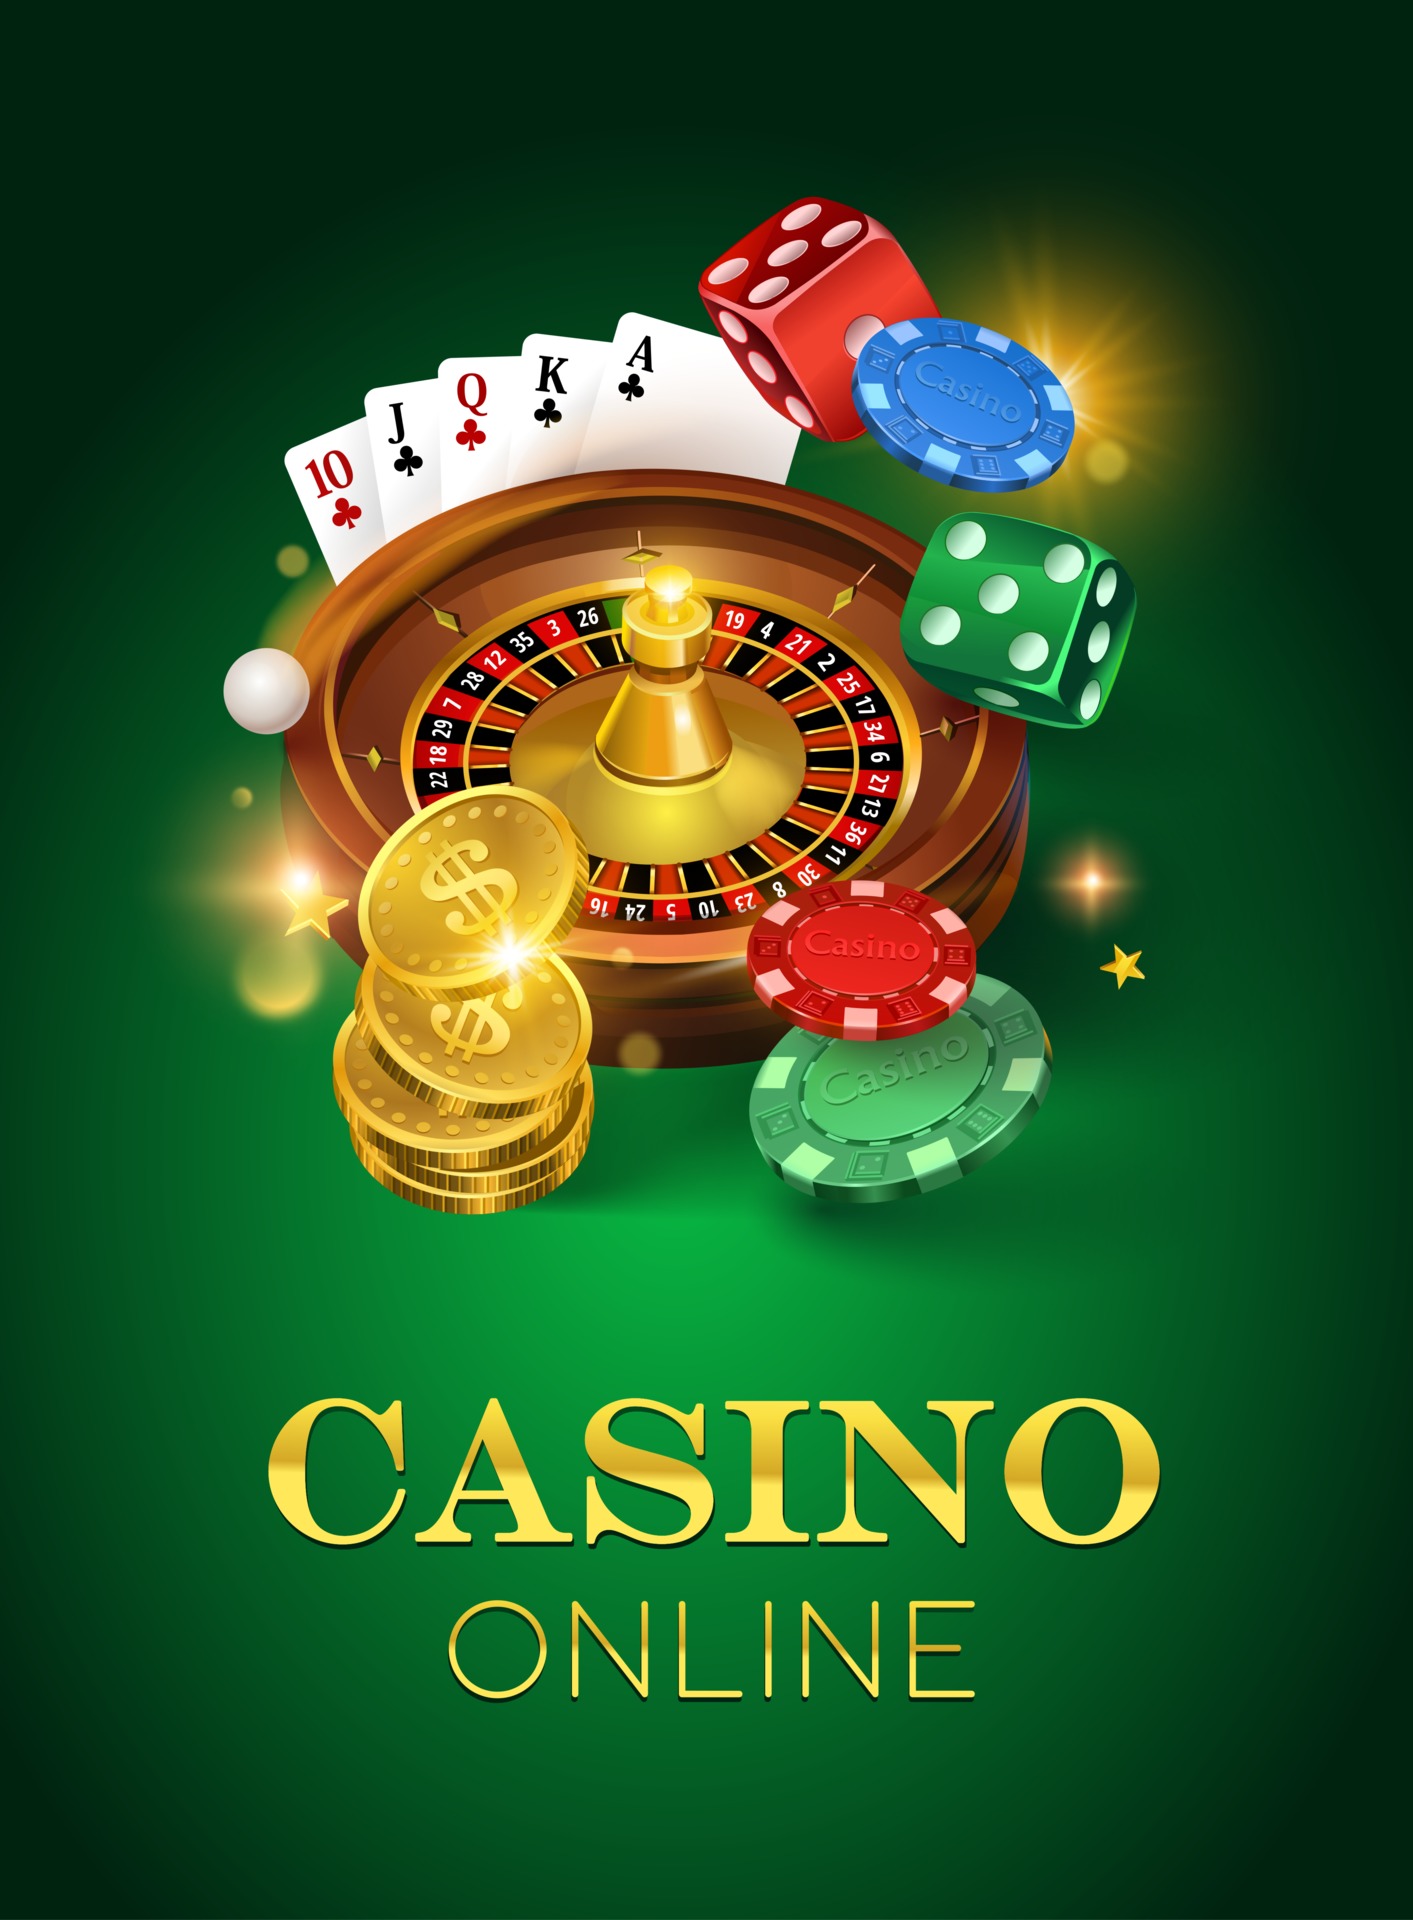 Lucky Sprite Casino Online Slots - A Fun Way to Pass the Time